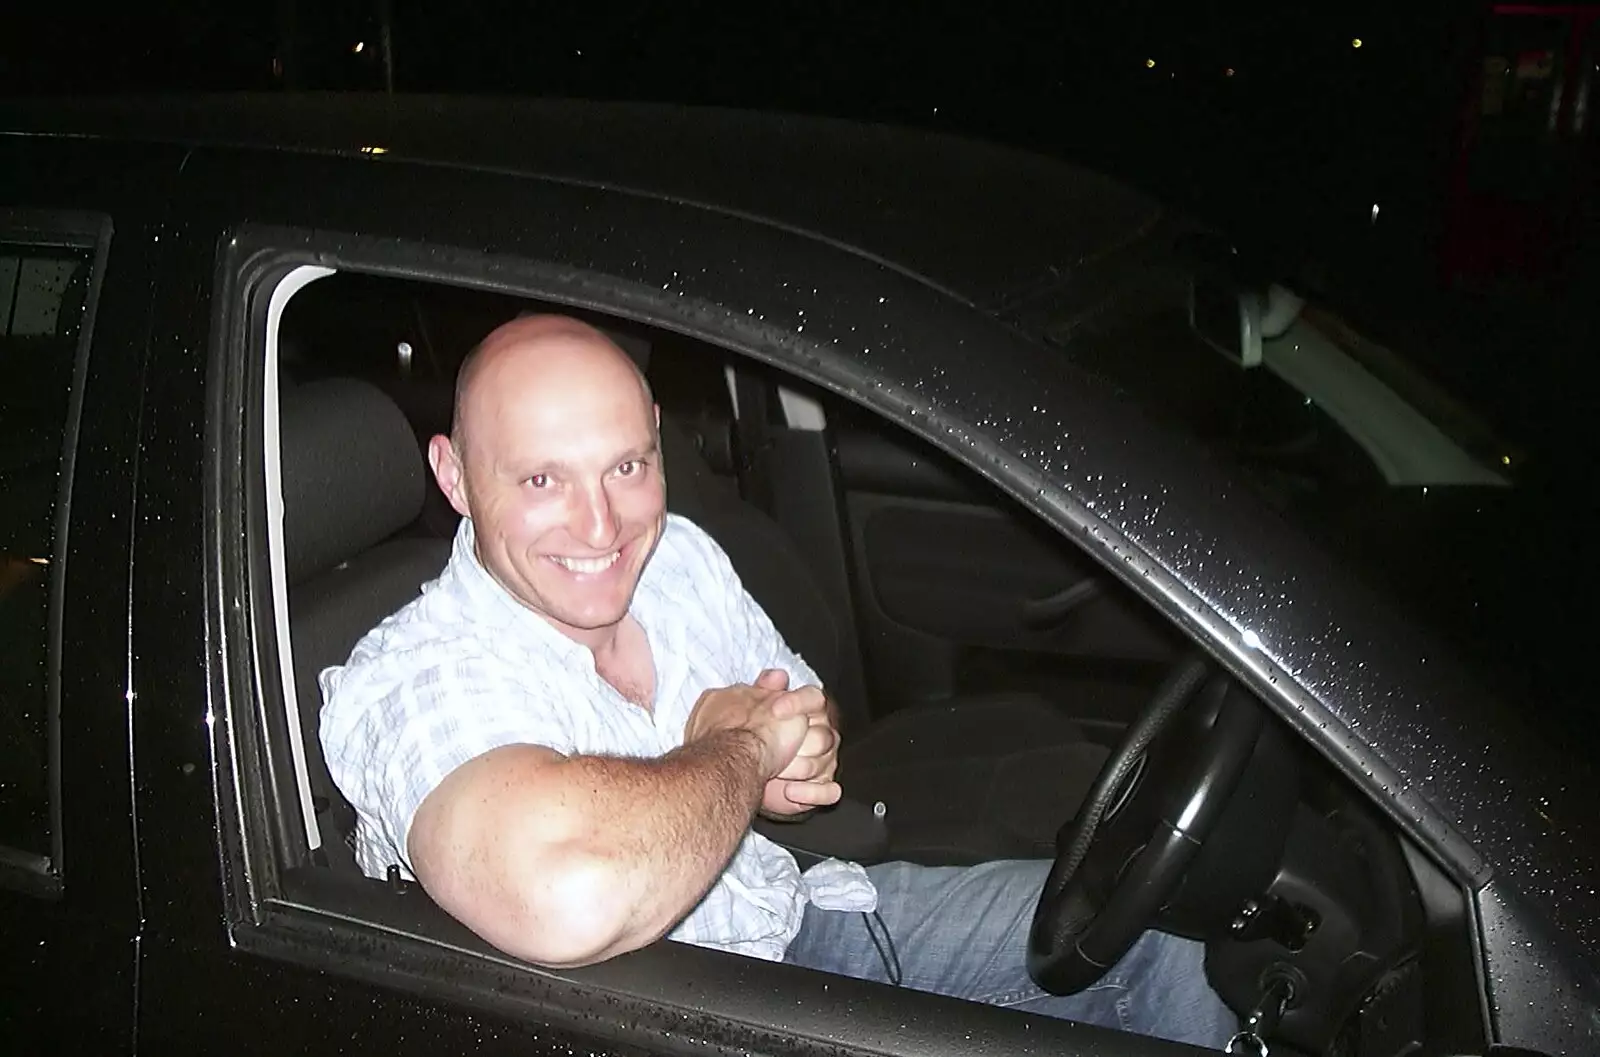 Gov in his motor, from Paul's Stag Night, Brome, Scole and Bressingham - Friday 20th August 2004